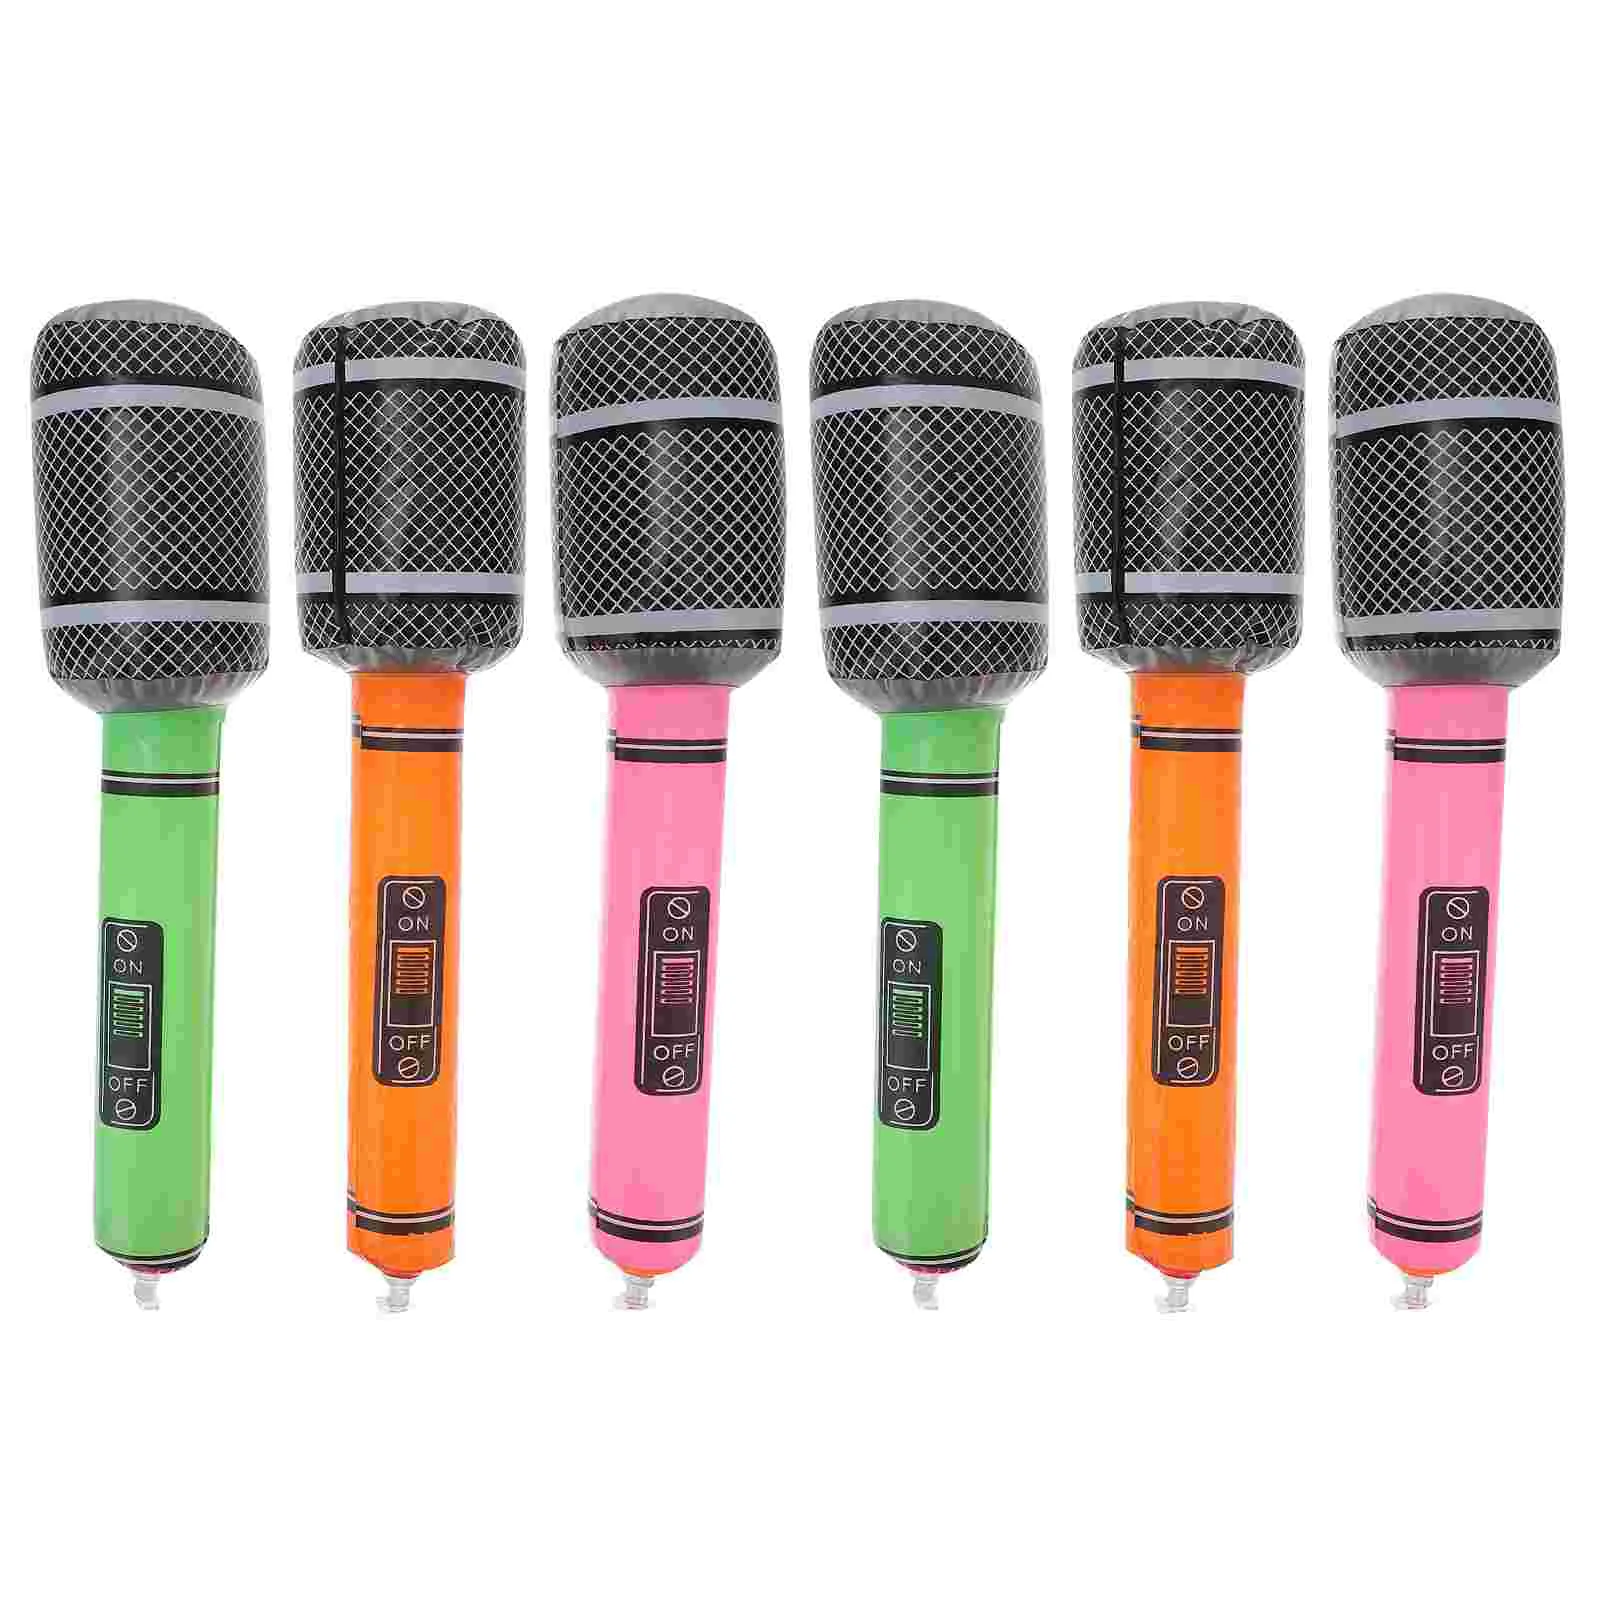 

6pcs Ballon Plastic Microphone Shaped Inflatable Blow Funny Party Favor Kids Gift for Kids